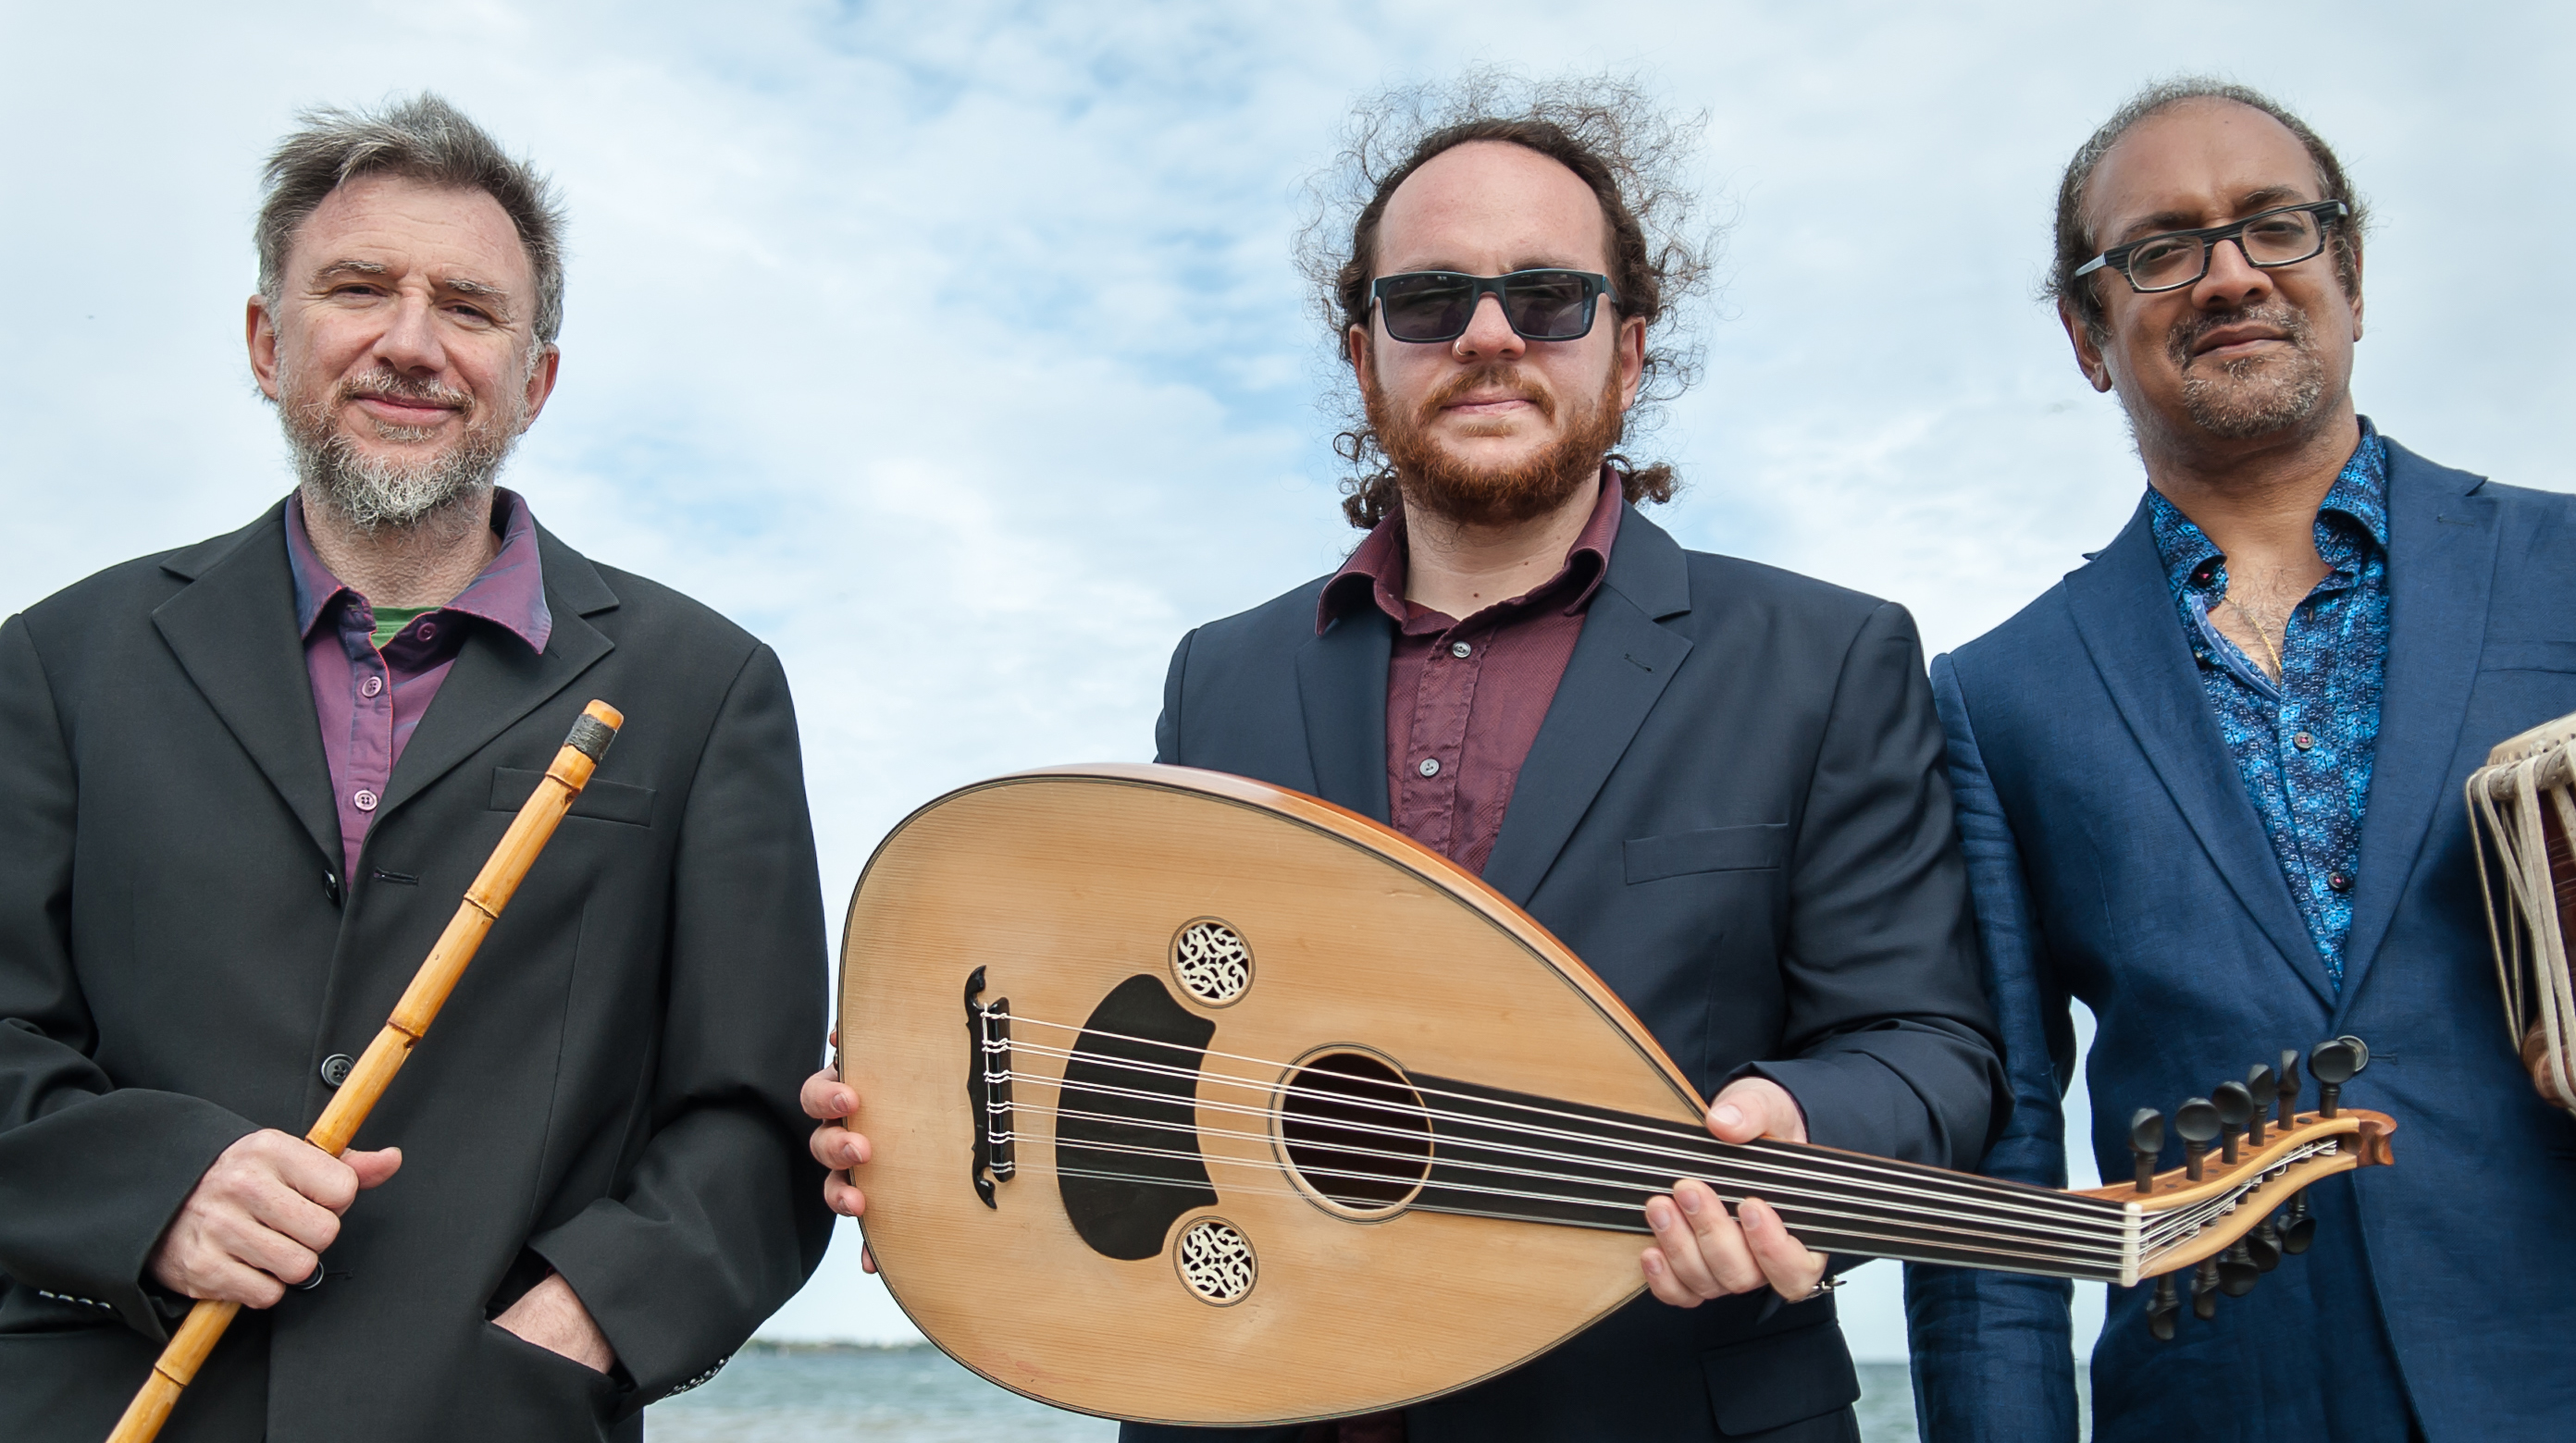 Three men in blazers stand outside holding instruments. A reed-style flute, a guitar-shaped instrumented that is decorated, and a drum.